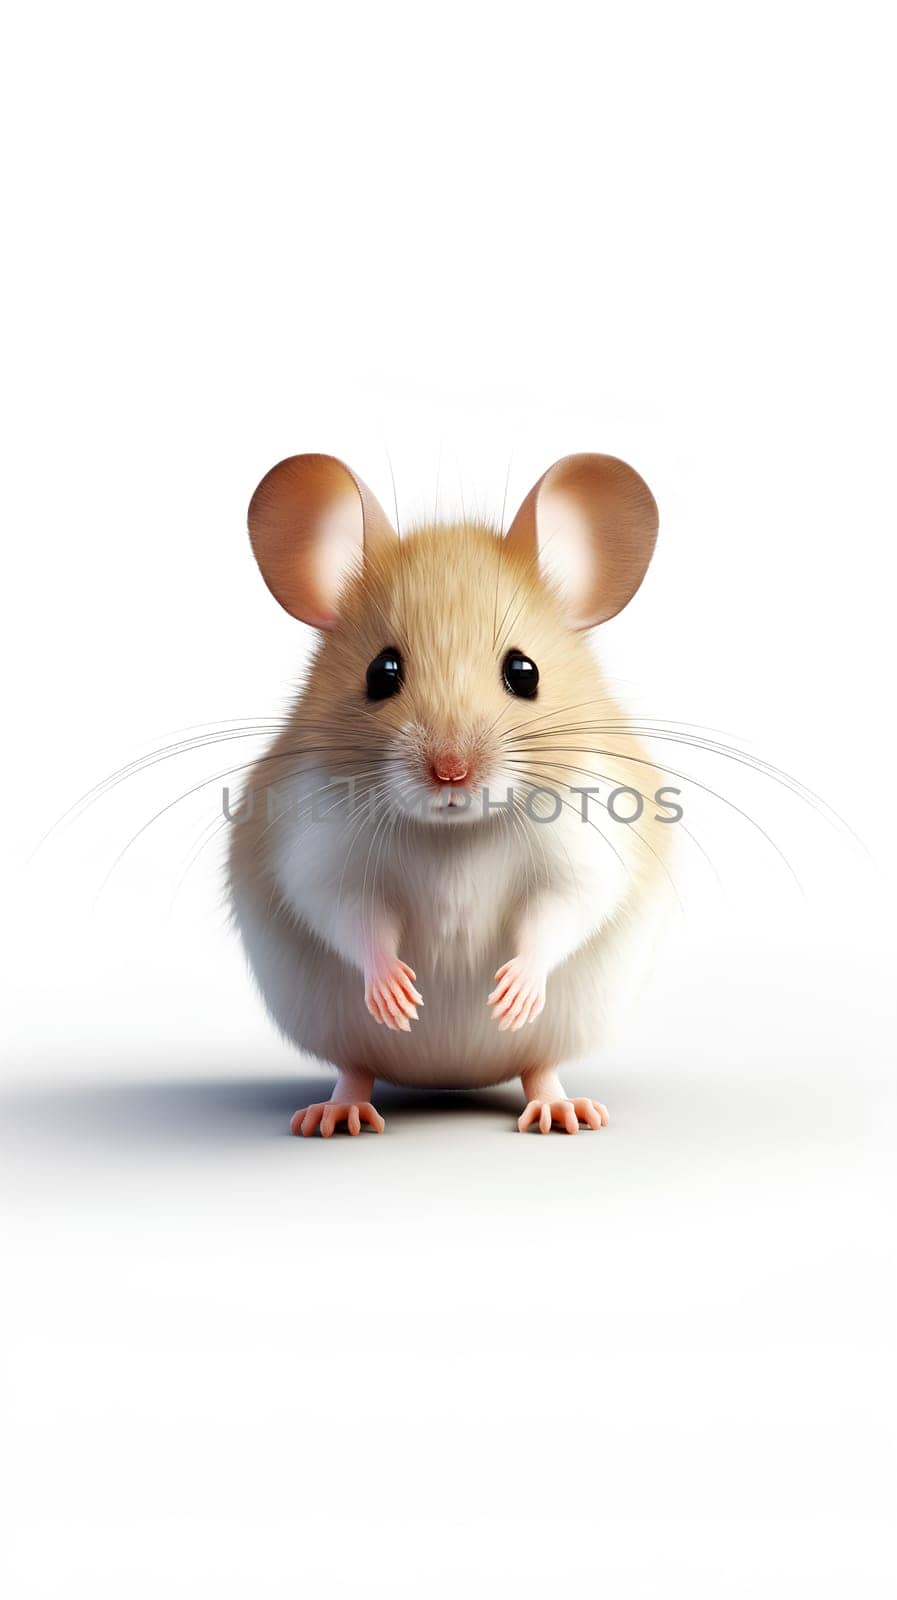 A cute cartoon mouse with big eyes and ears on white background by chrisroll